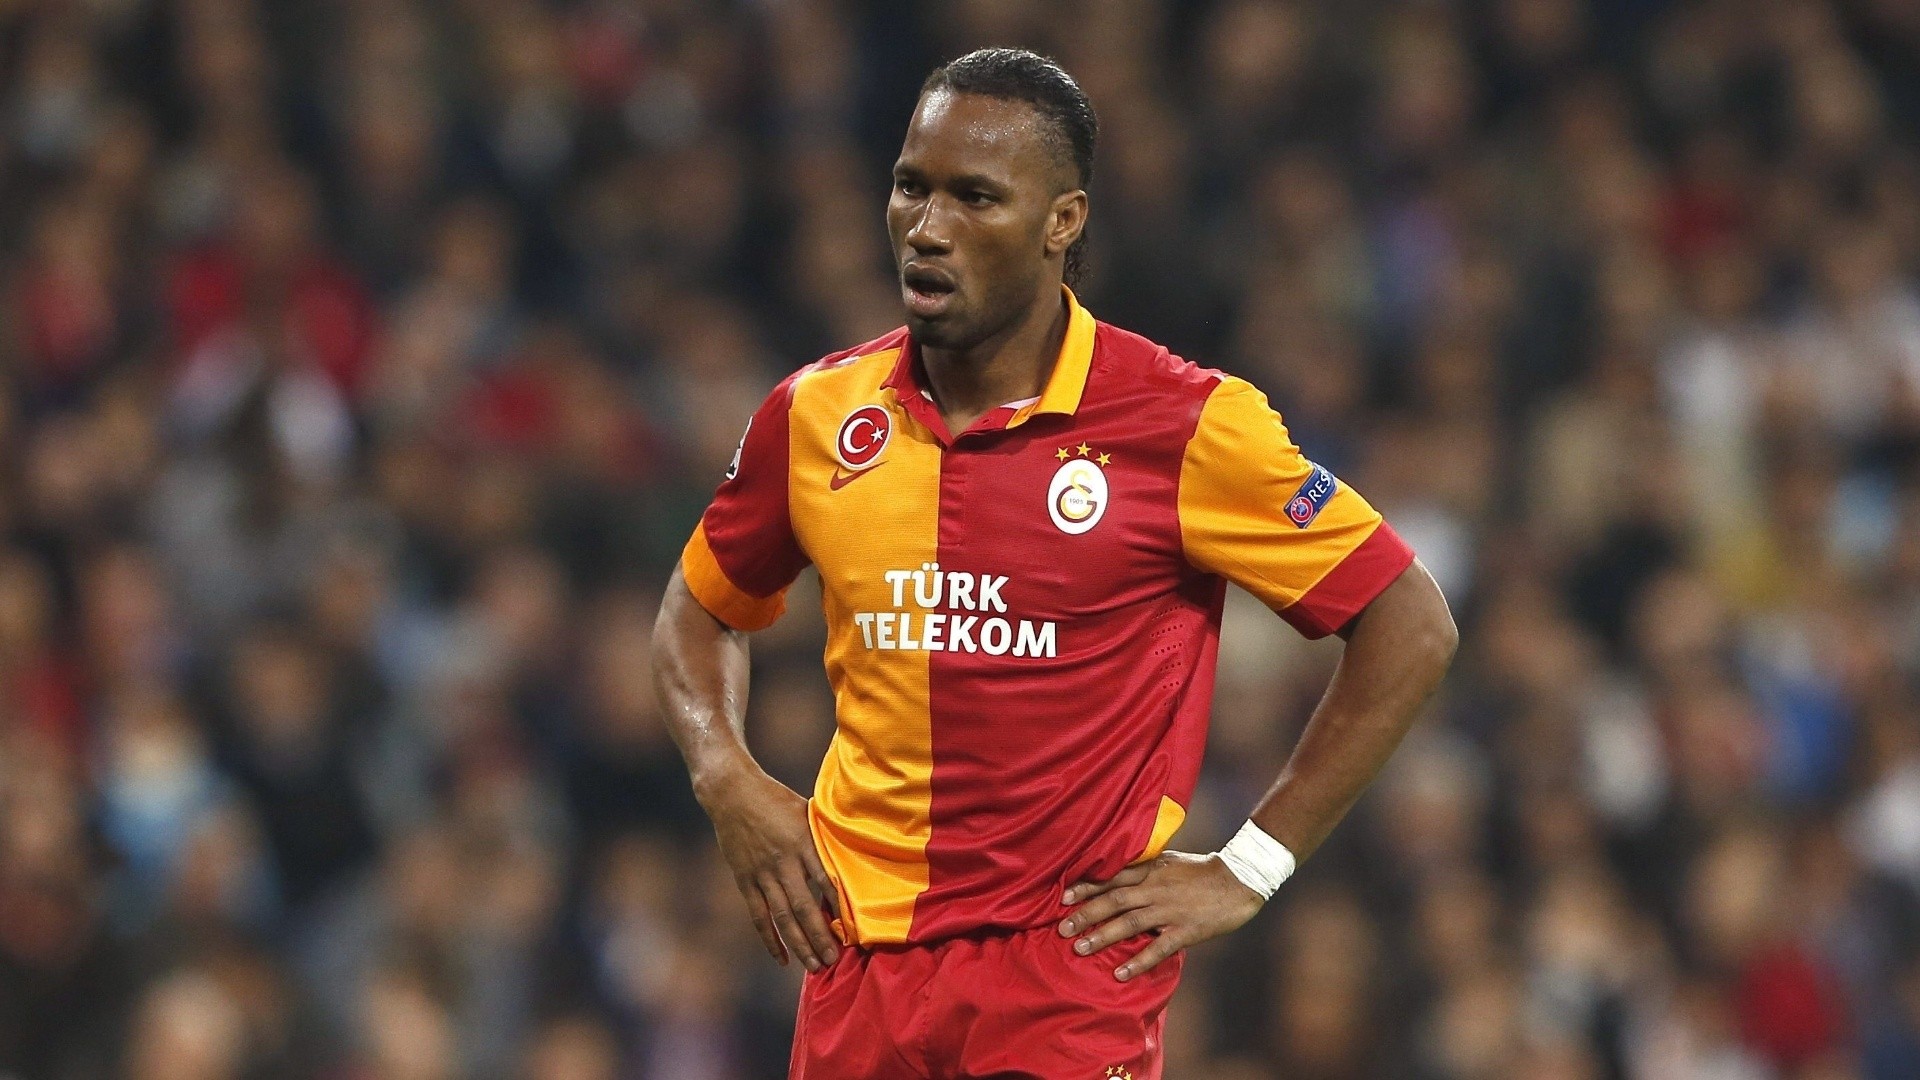 Didier Drogba’s return to Stamford Bridge did not go as planned for 